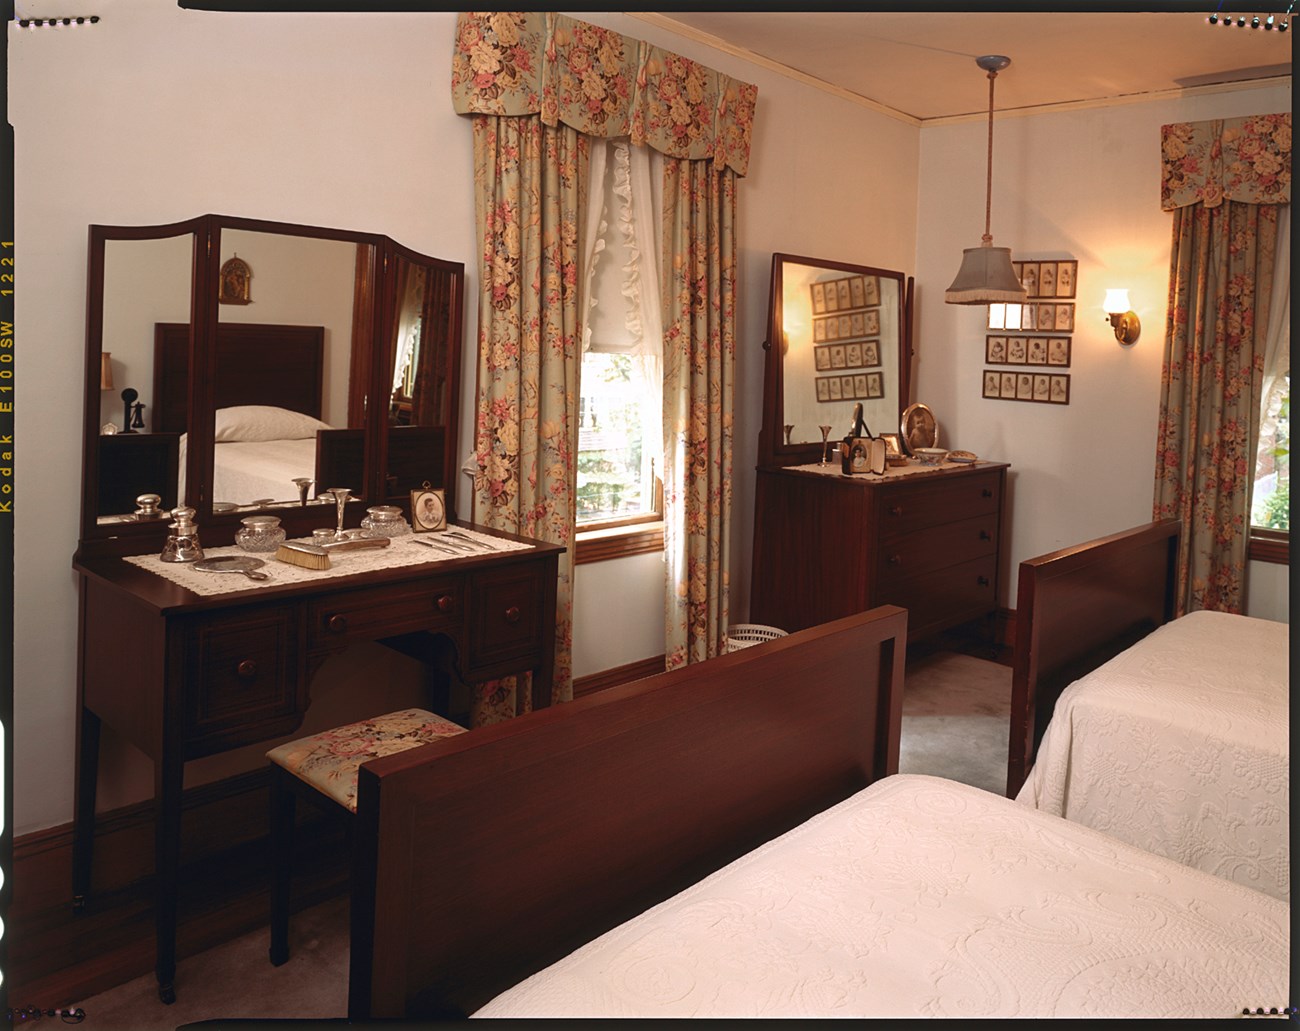 A photo of two dark wood vanities on each side of a window, across from two twin beds. On one vanity is a set of silver grooming tools, including a mirror and hairbrush, and a framed photograph. On the other are more photographs.